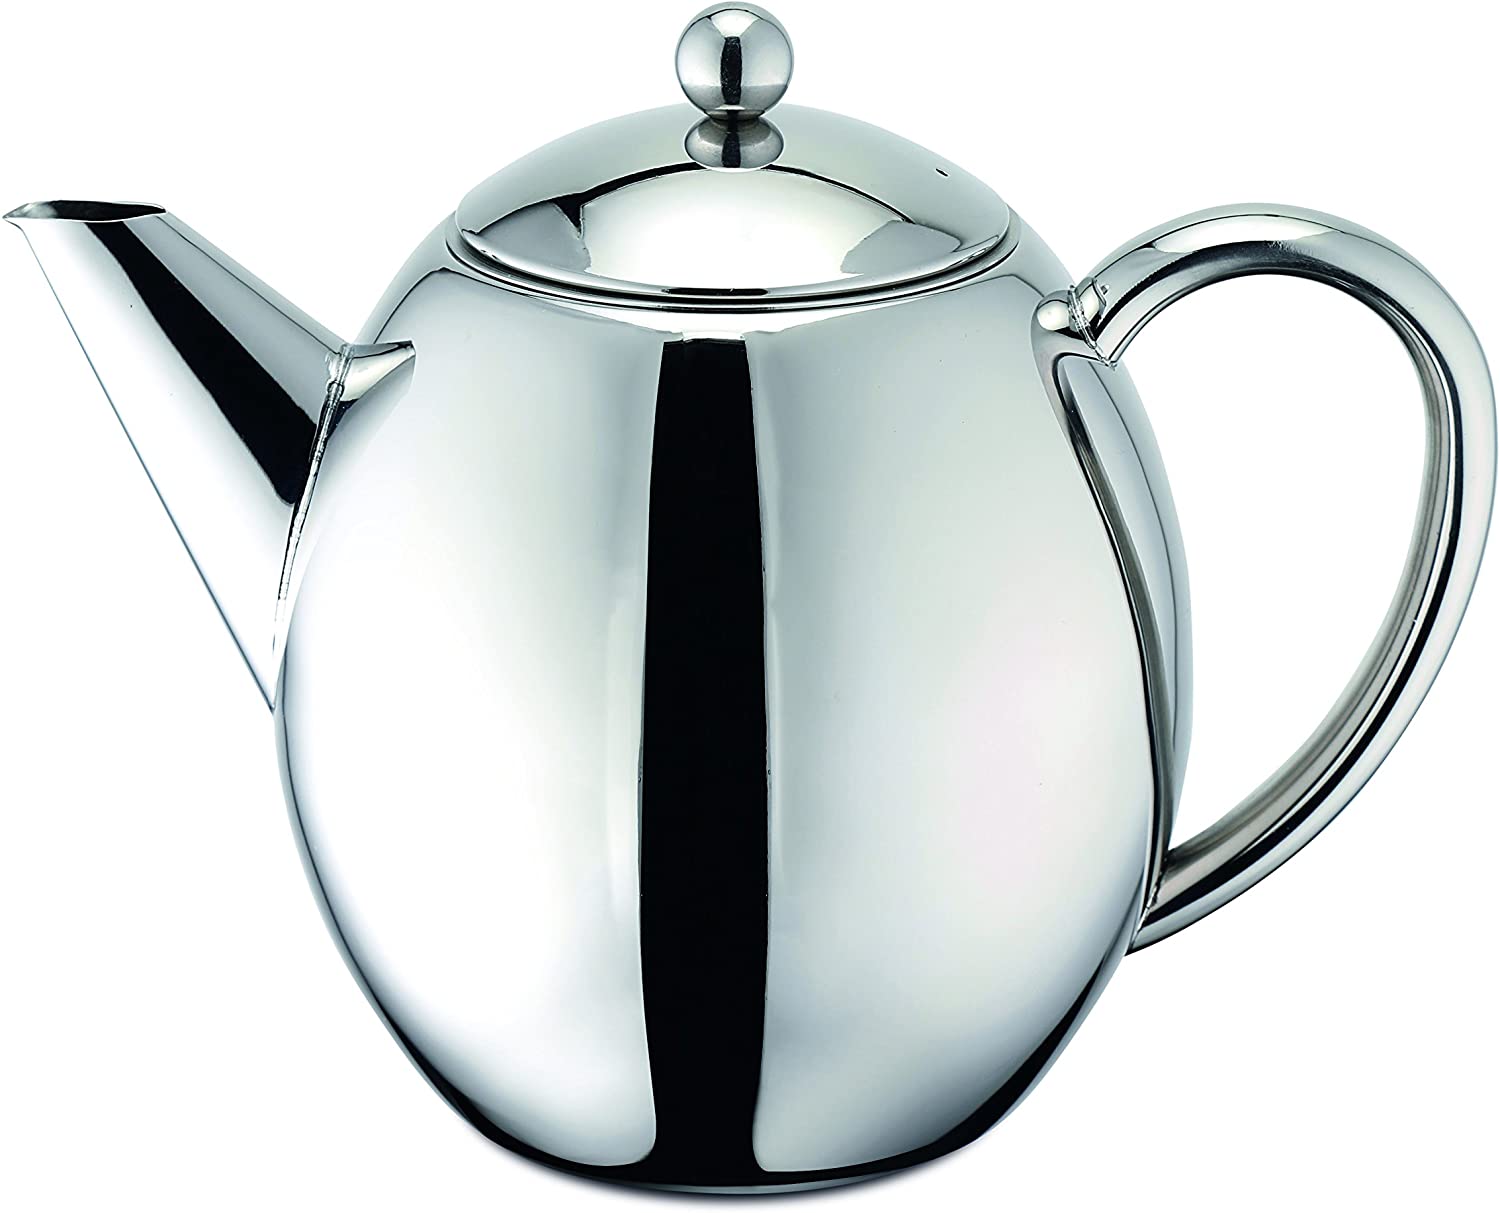 Weis 17350 Stainless Steel Tea Pot 1 Litre with Double-Layer Thermal Insulation with Filter